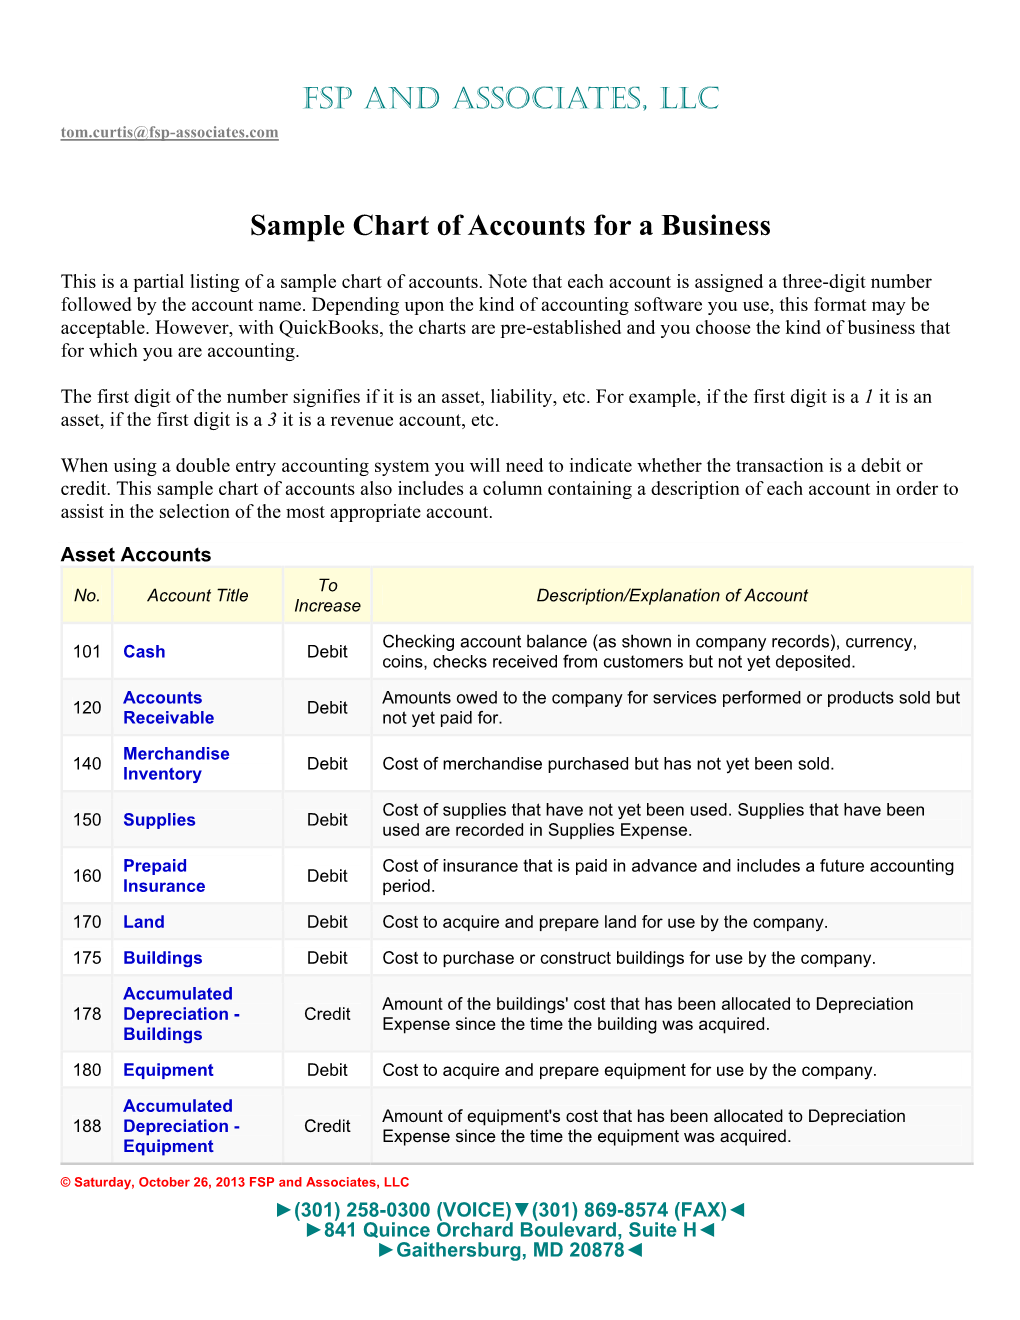 FSP and ASSOCIATES, LLC Sample Chart of Accounts for a Business